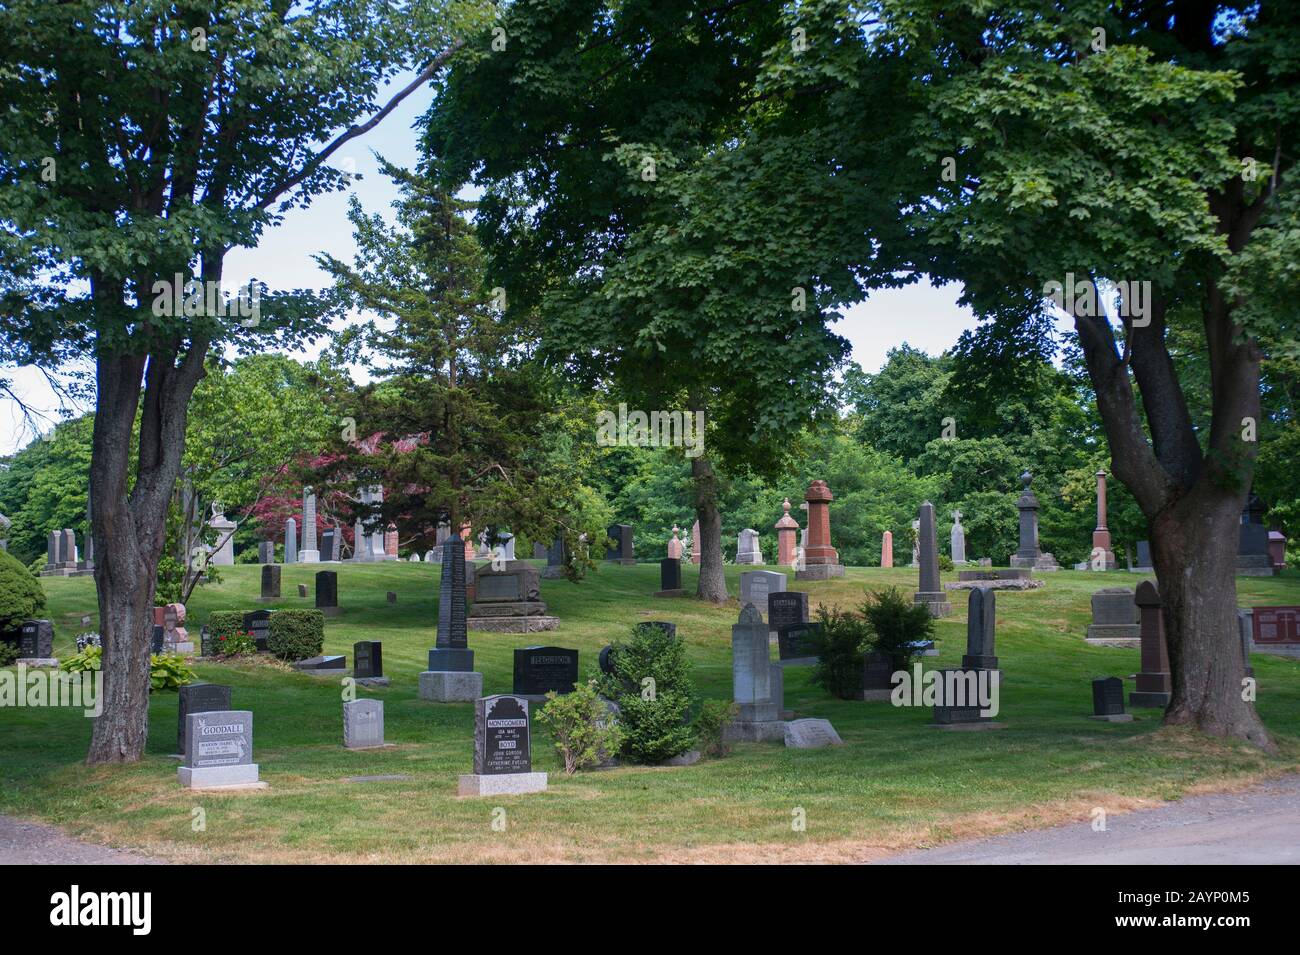 Fairview Lawn Cemetery in Halifax, Nova Scotia, Canada., is the final resting place for over one hundred victims of the sinking of the RMS Titanic. Stock Photo